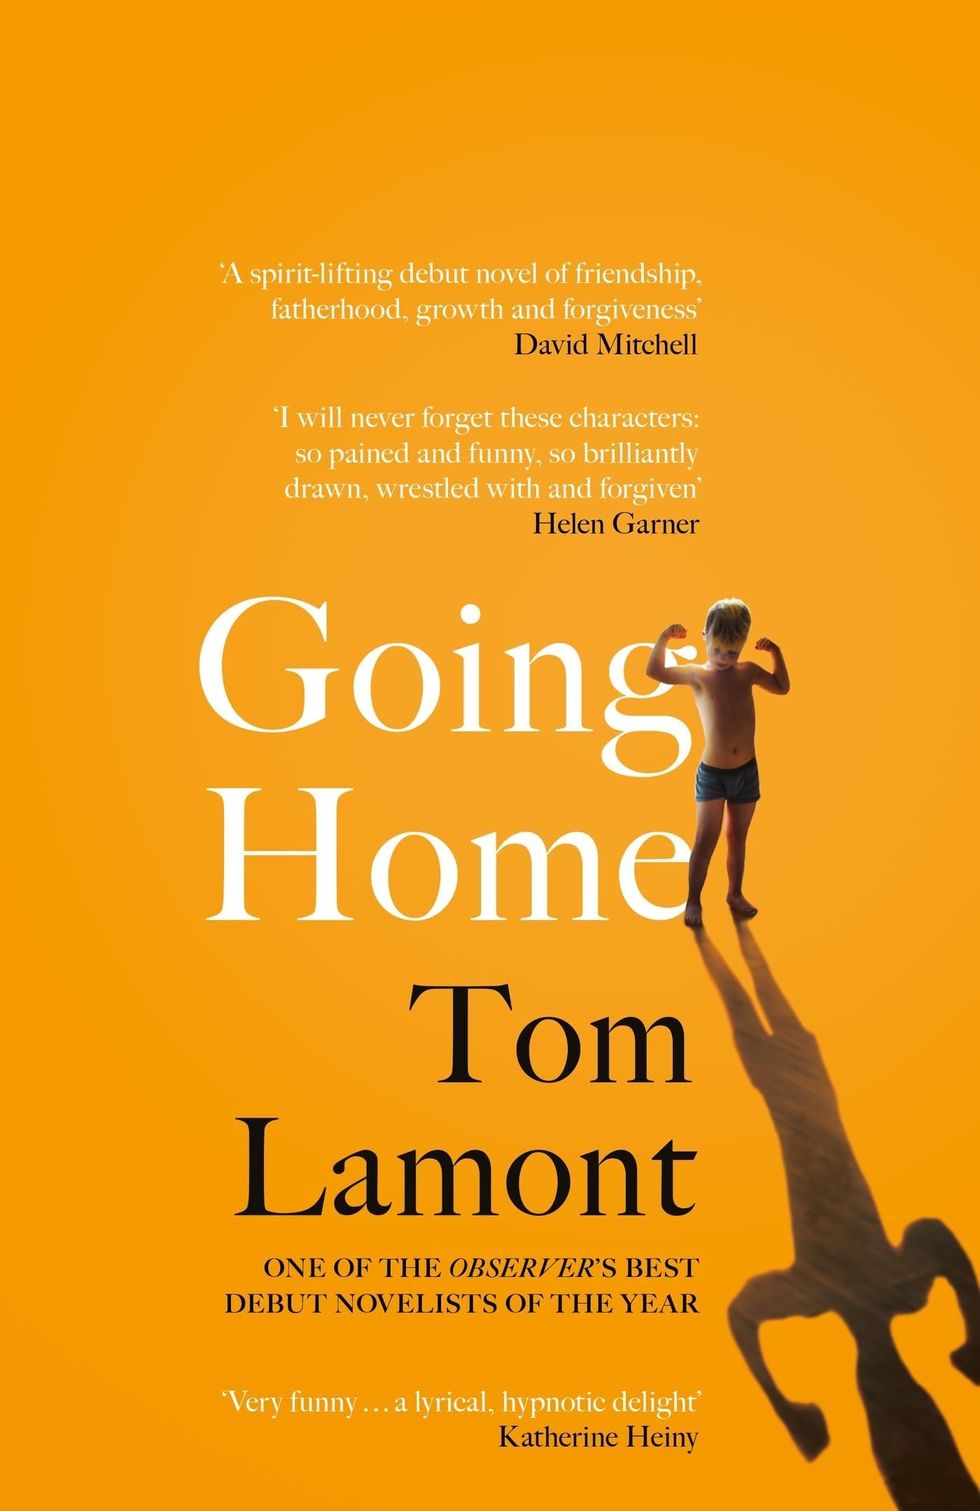 Going Home by Tom Lamont